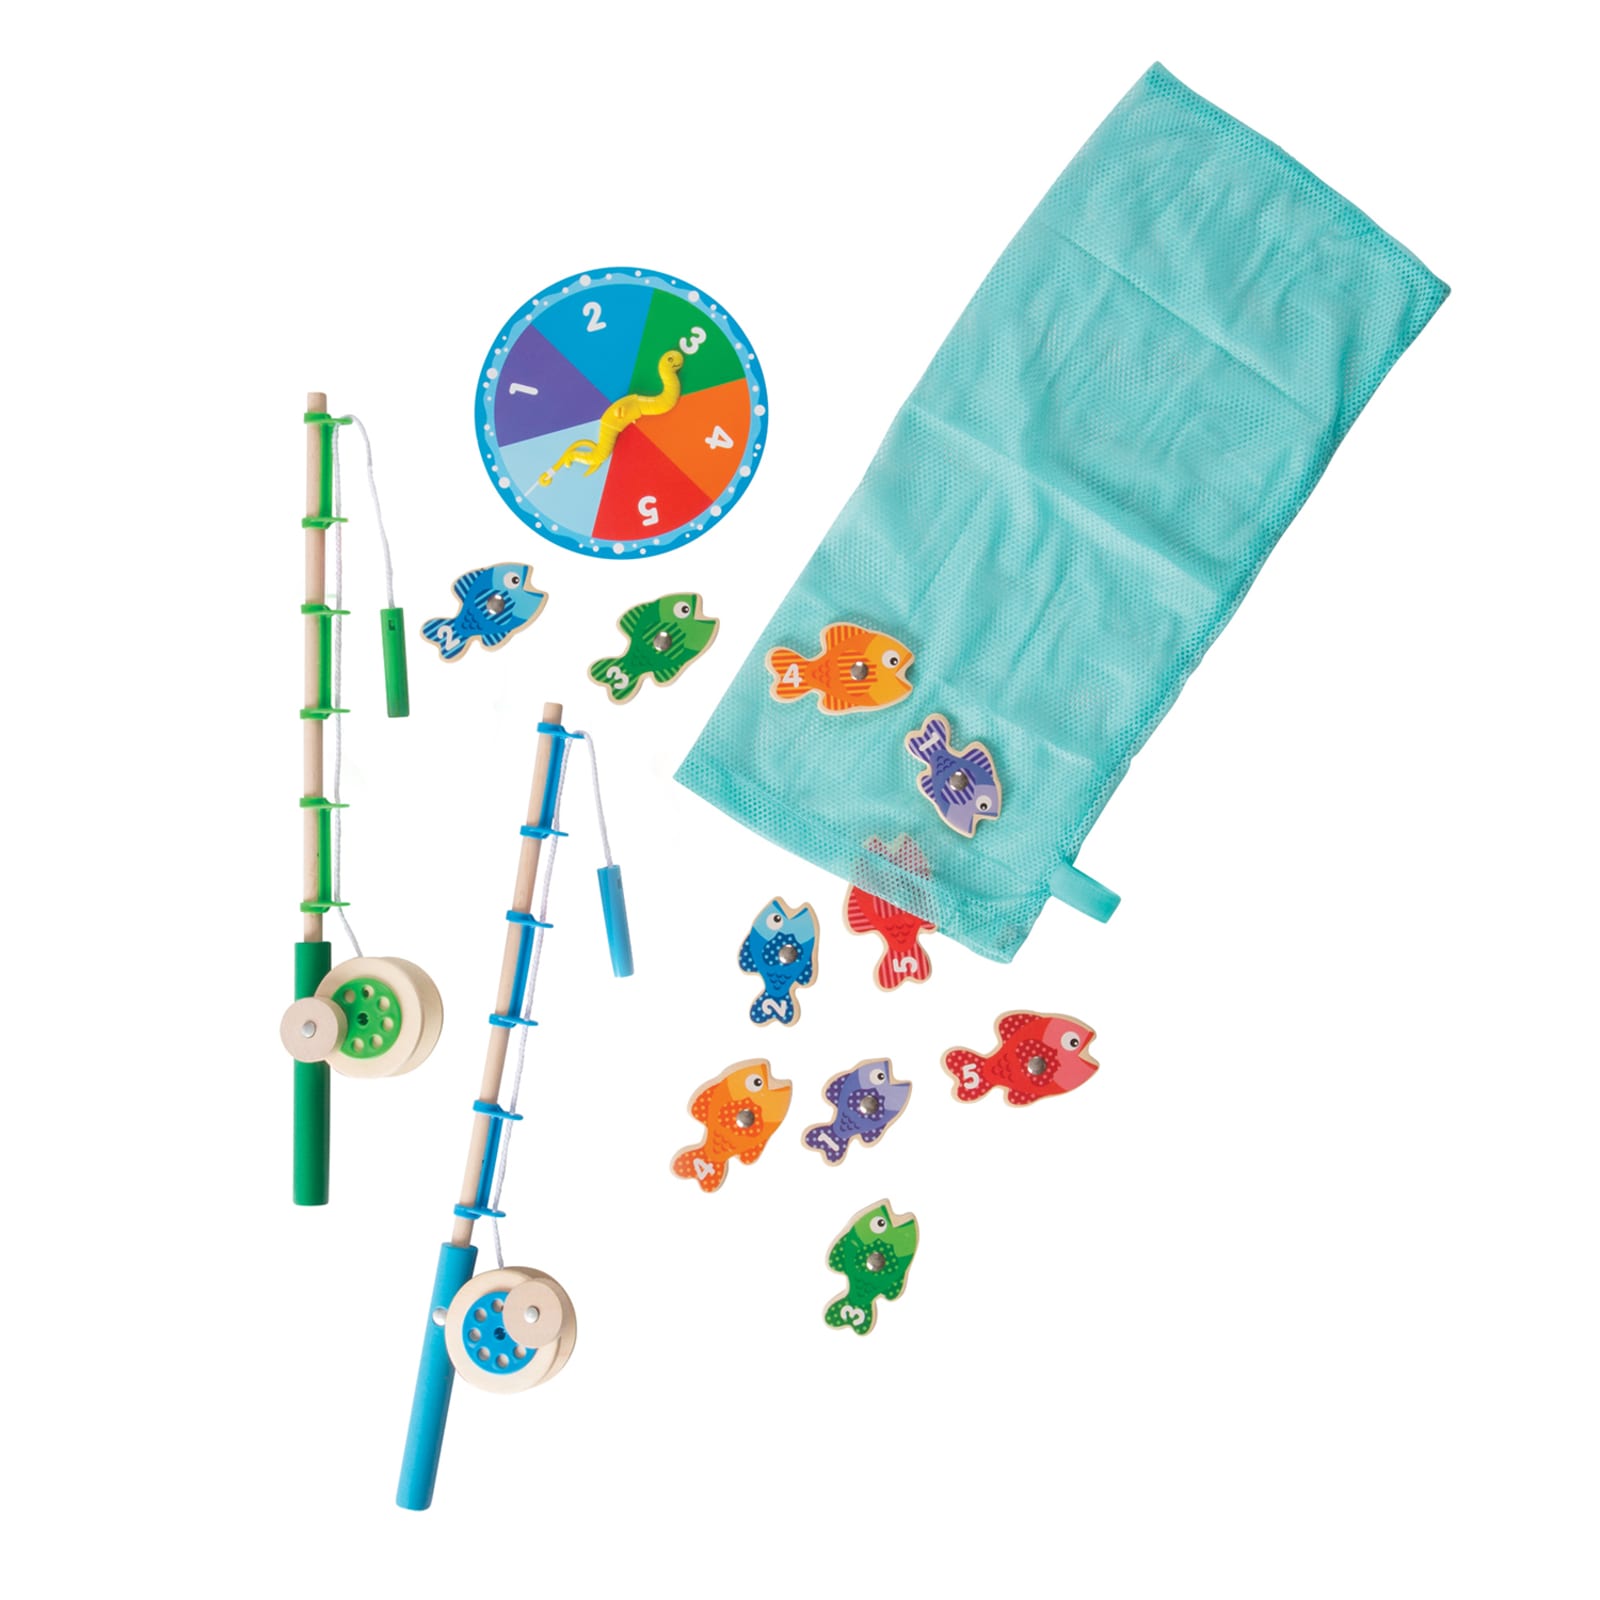 Catch & Count Magnetic Fishing Rod Set by Melissa & Doug at Fleet Farm